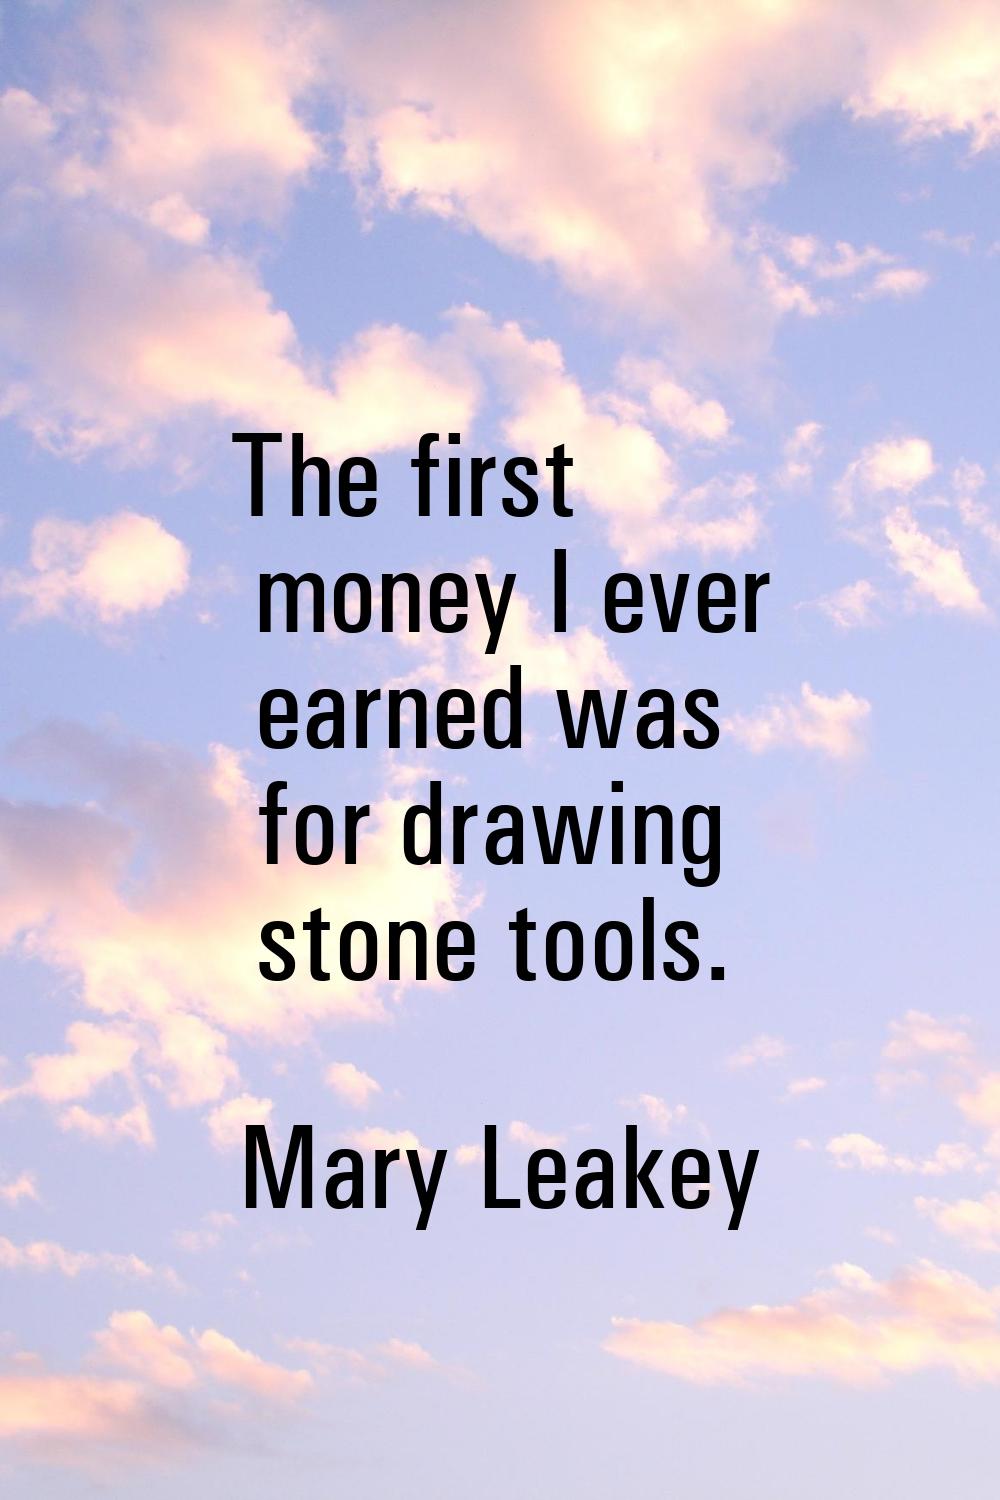 The first money I ever earned was for drawing stone tools.